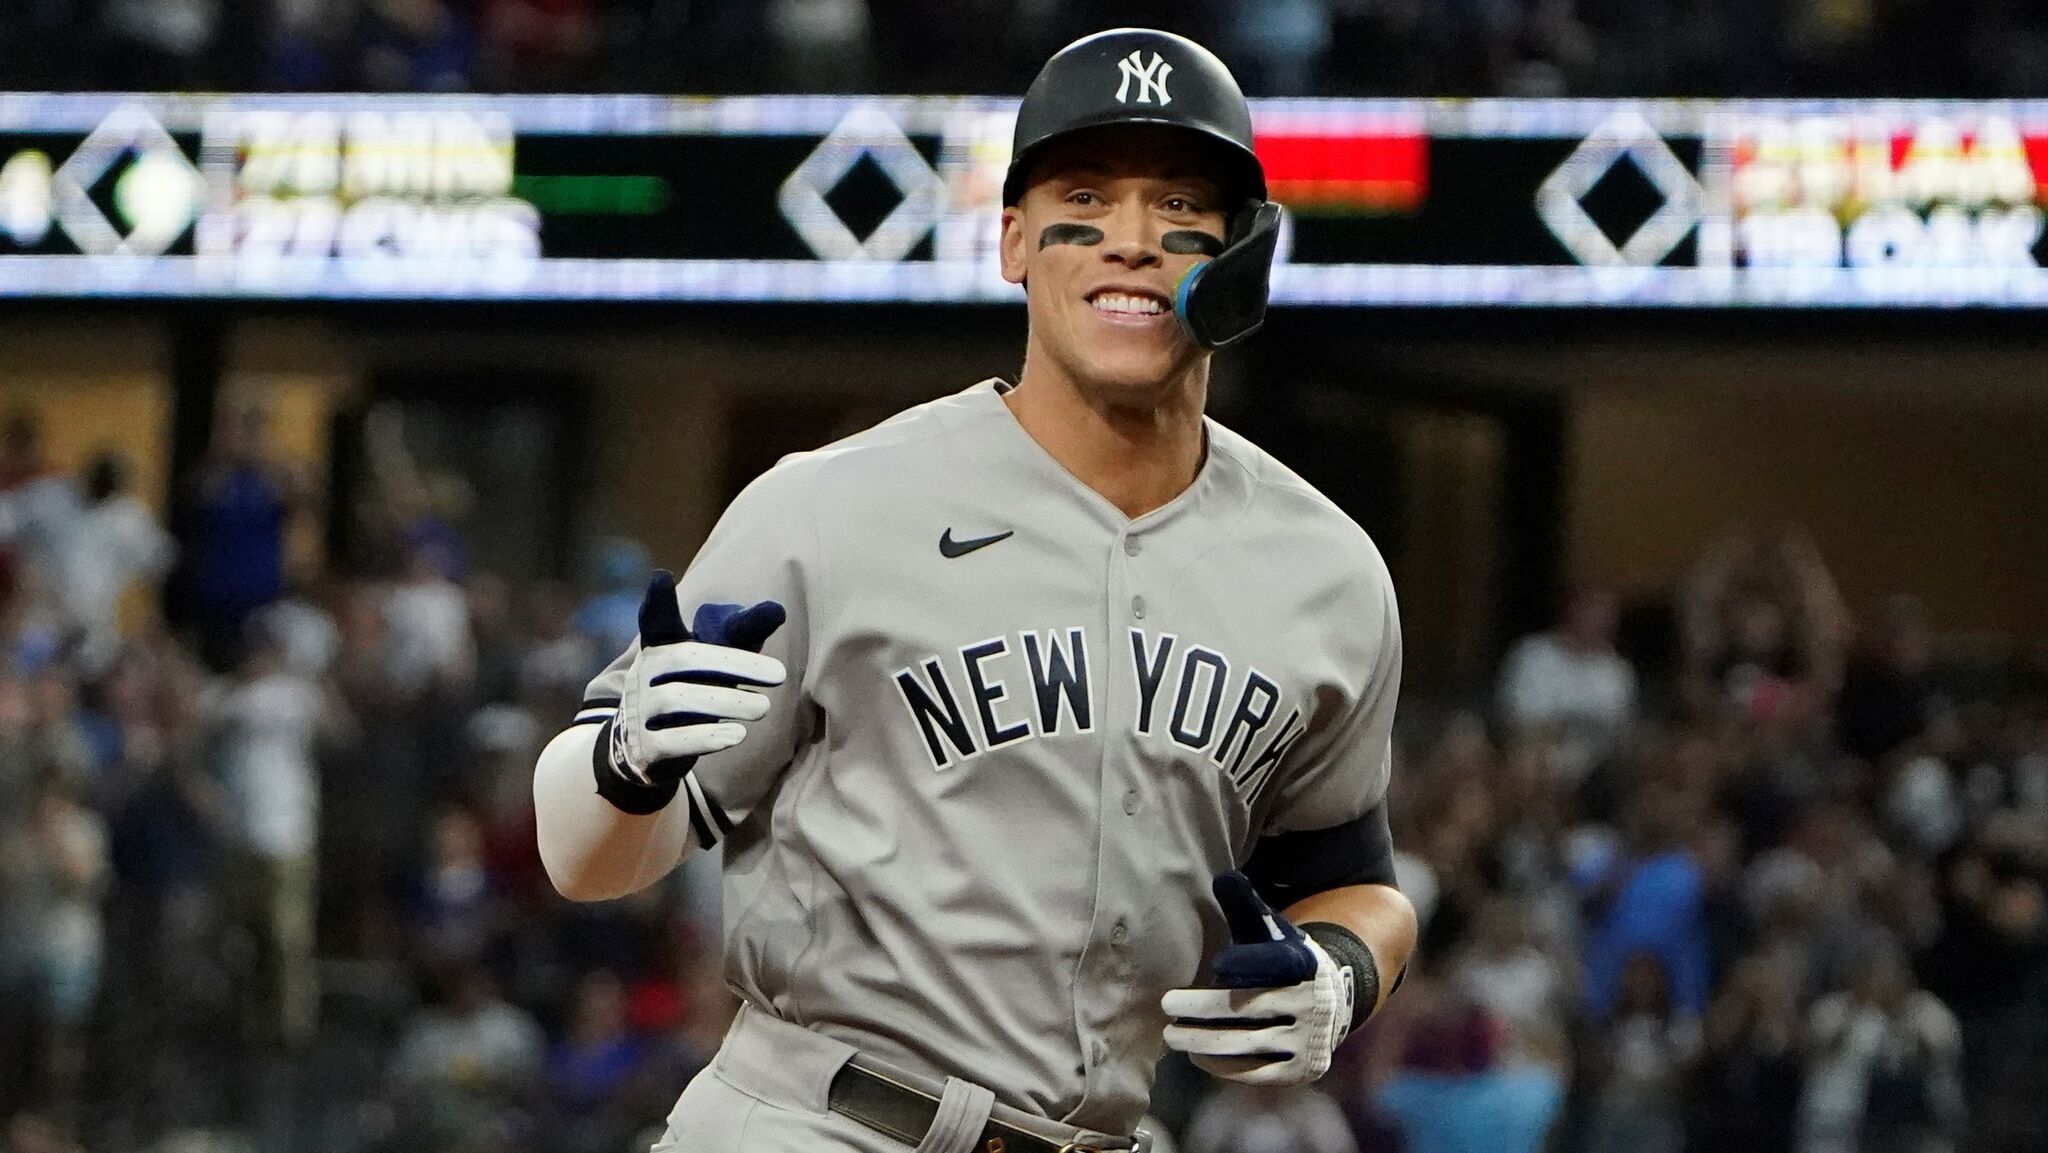 New York Giants - ALL RISE! Congrats Aaron Judge on making history ⚾️